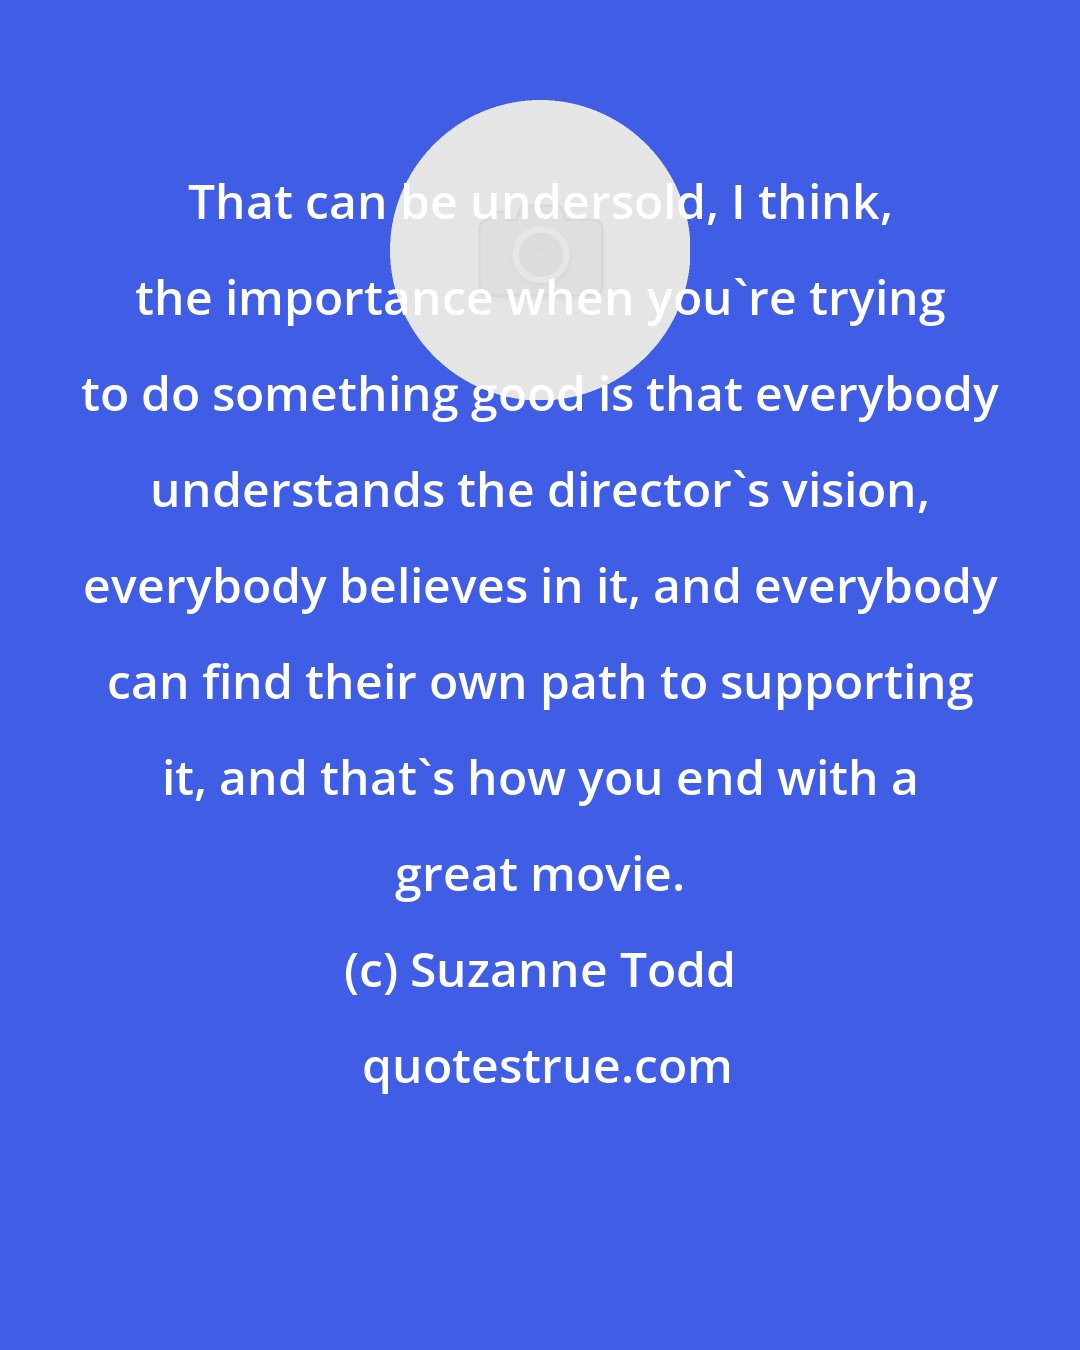 Suzanne Todd: That can be undersold, I think, the importance when you're trying to do something good is that everybody understands the director's vision, everybody believes in it, and everybody can find their own path to supporting it, and that's how you end with a great movie.